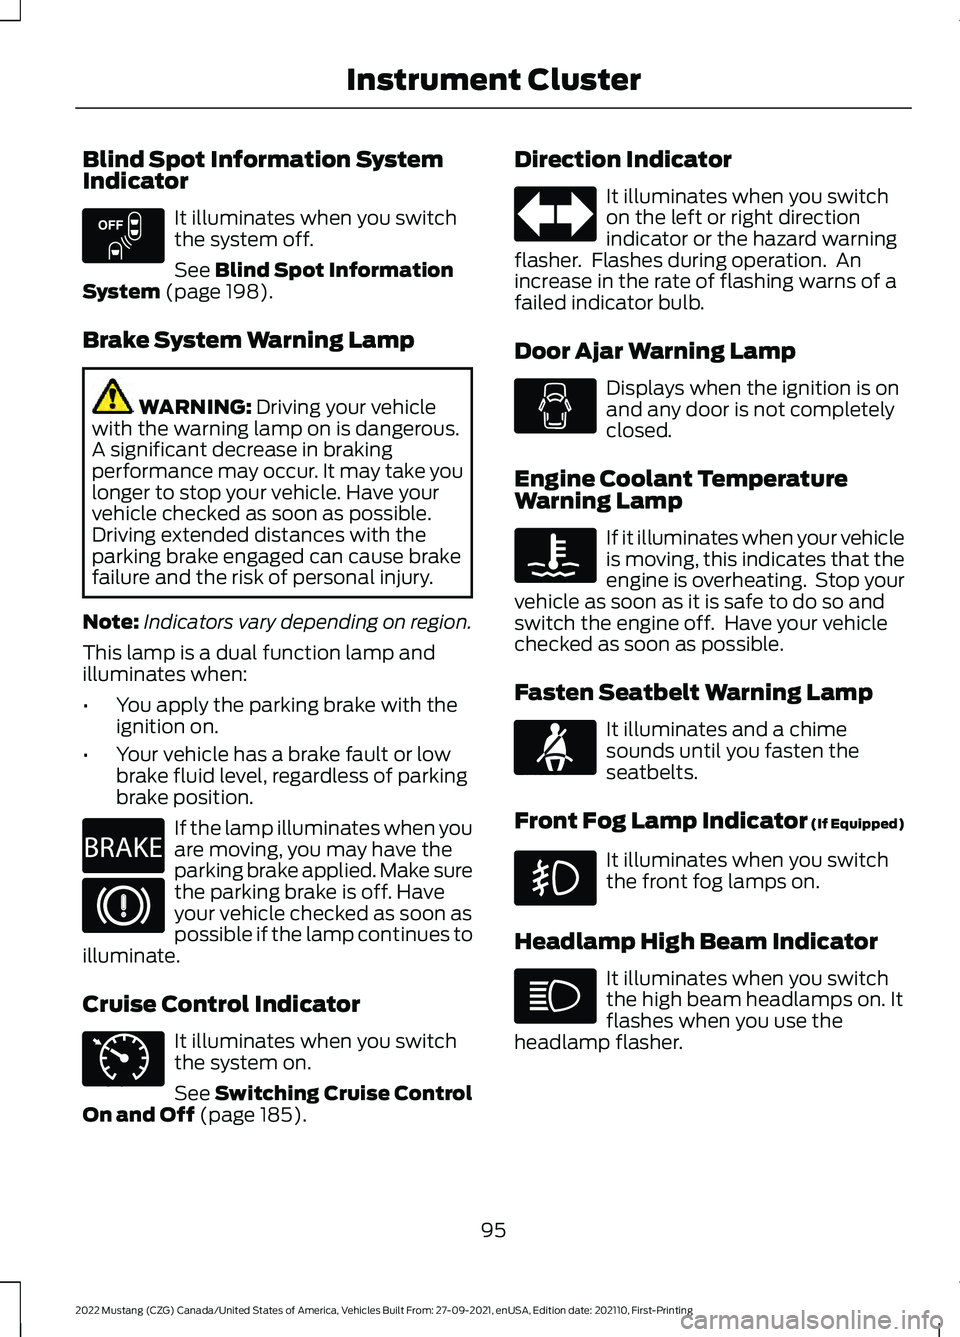 FORD MUSTANG 2022  Owners Manual Blind Spot Information System
Indicator
It illuminates when you switch
the system off.
See Blind Spot Information
System (page 198).
Brake System Warning Lamp WARNING: 
Driving your vehicle
with the w